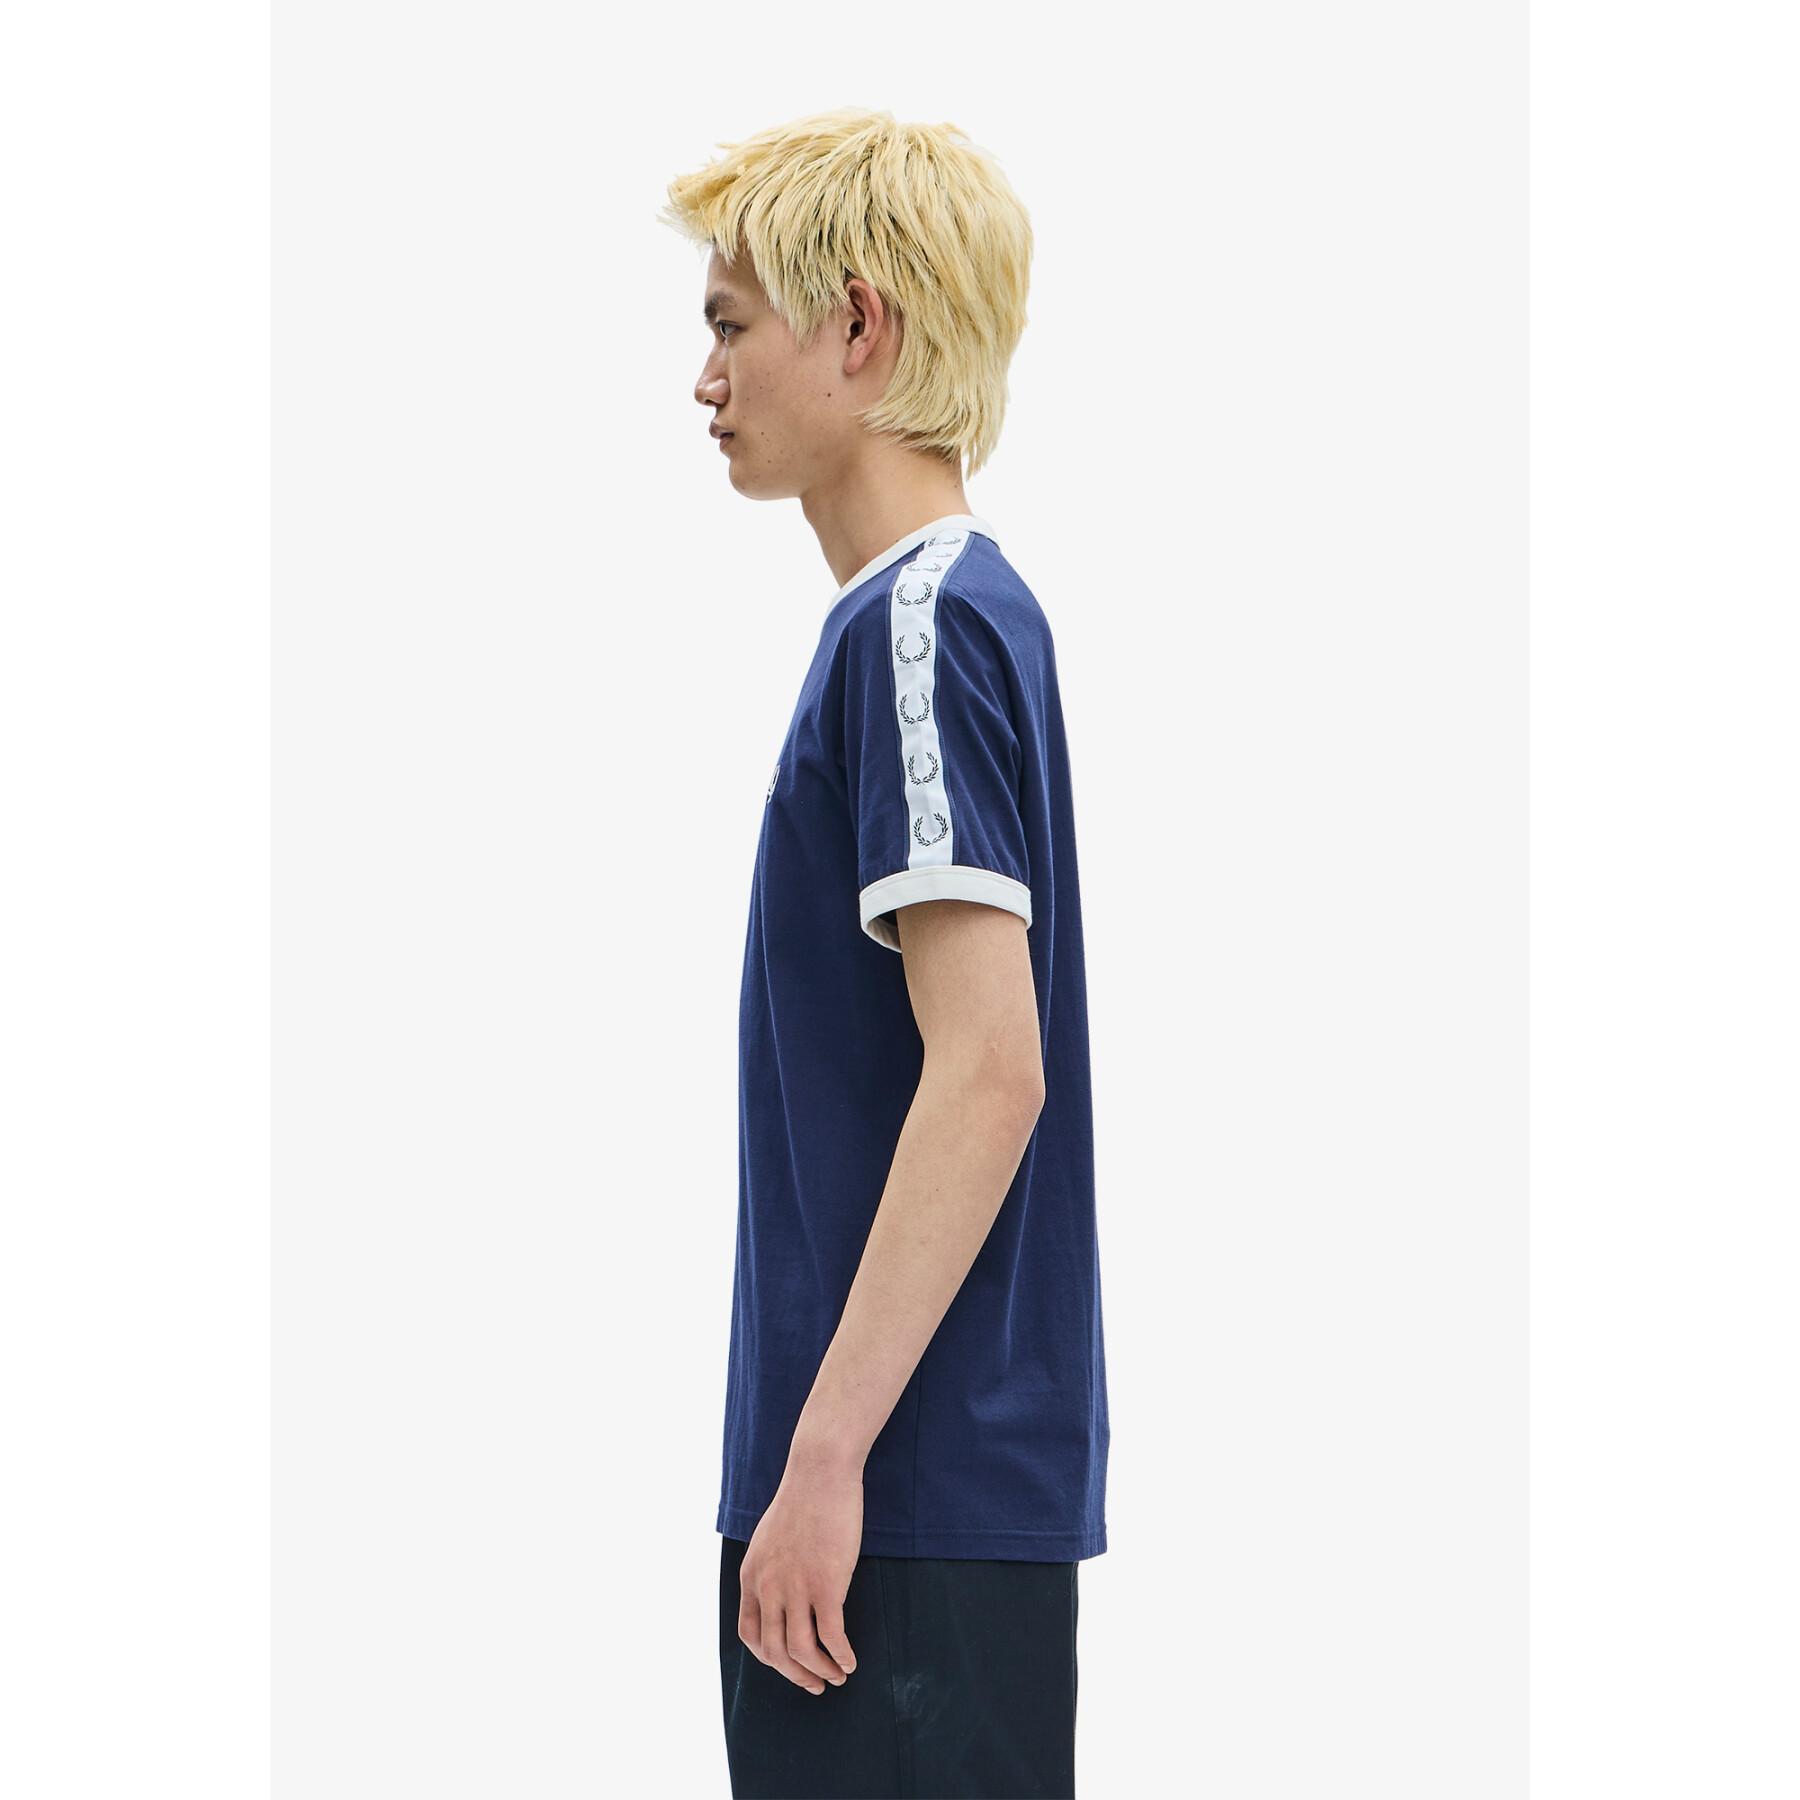 T-shirt met contrasterende rand en band Fred Perry